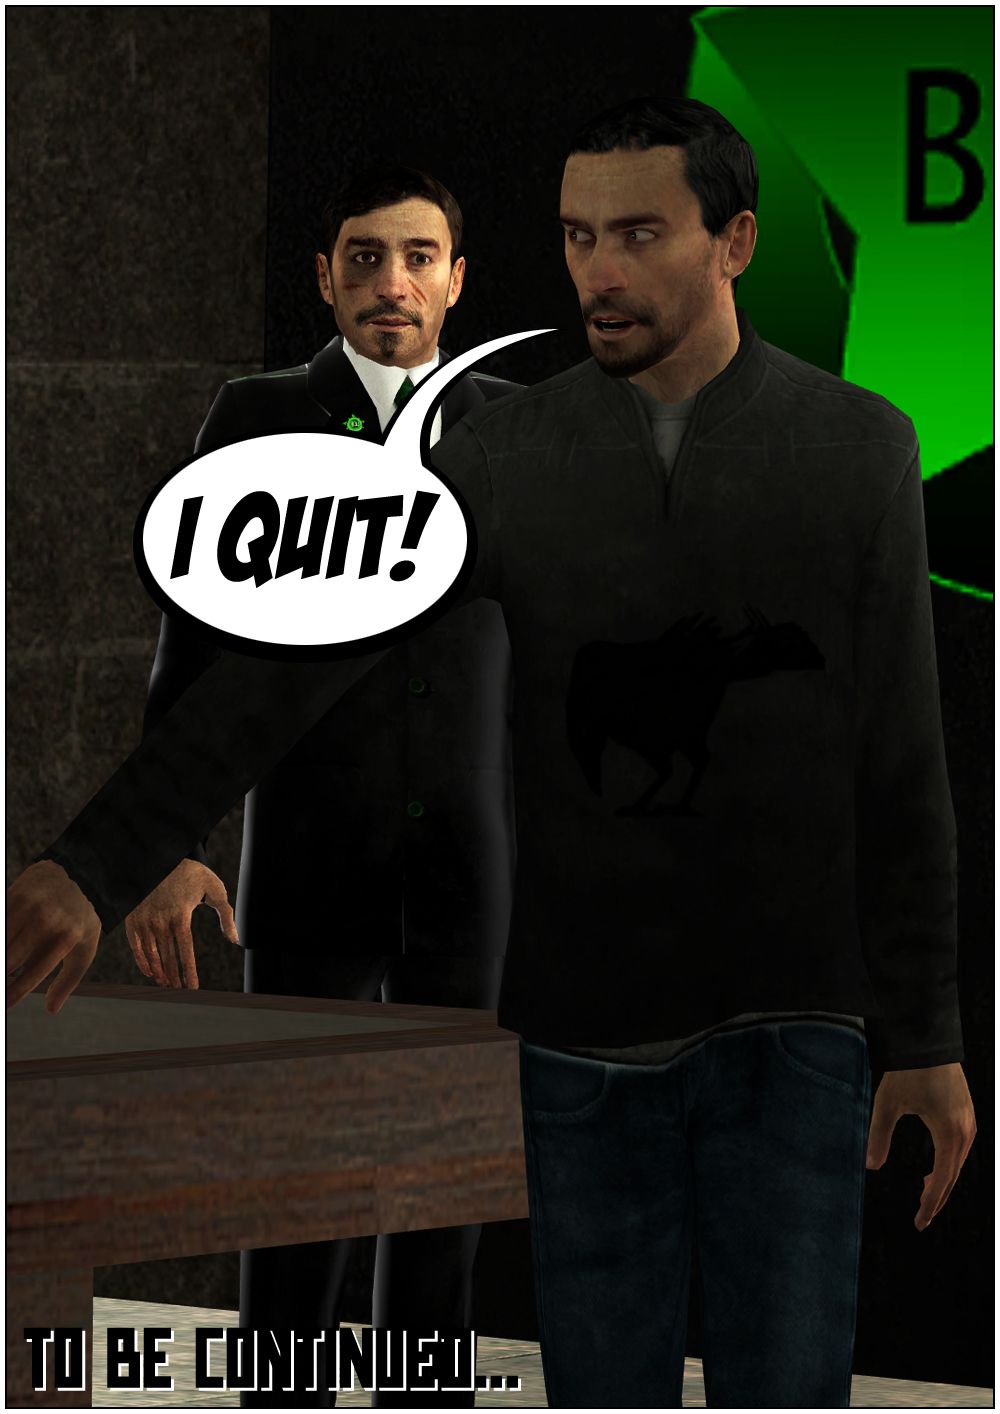 Mythos turns around to leave and, to Chris' shock, exclaims that he quits. The end.